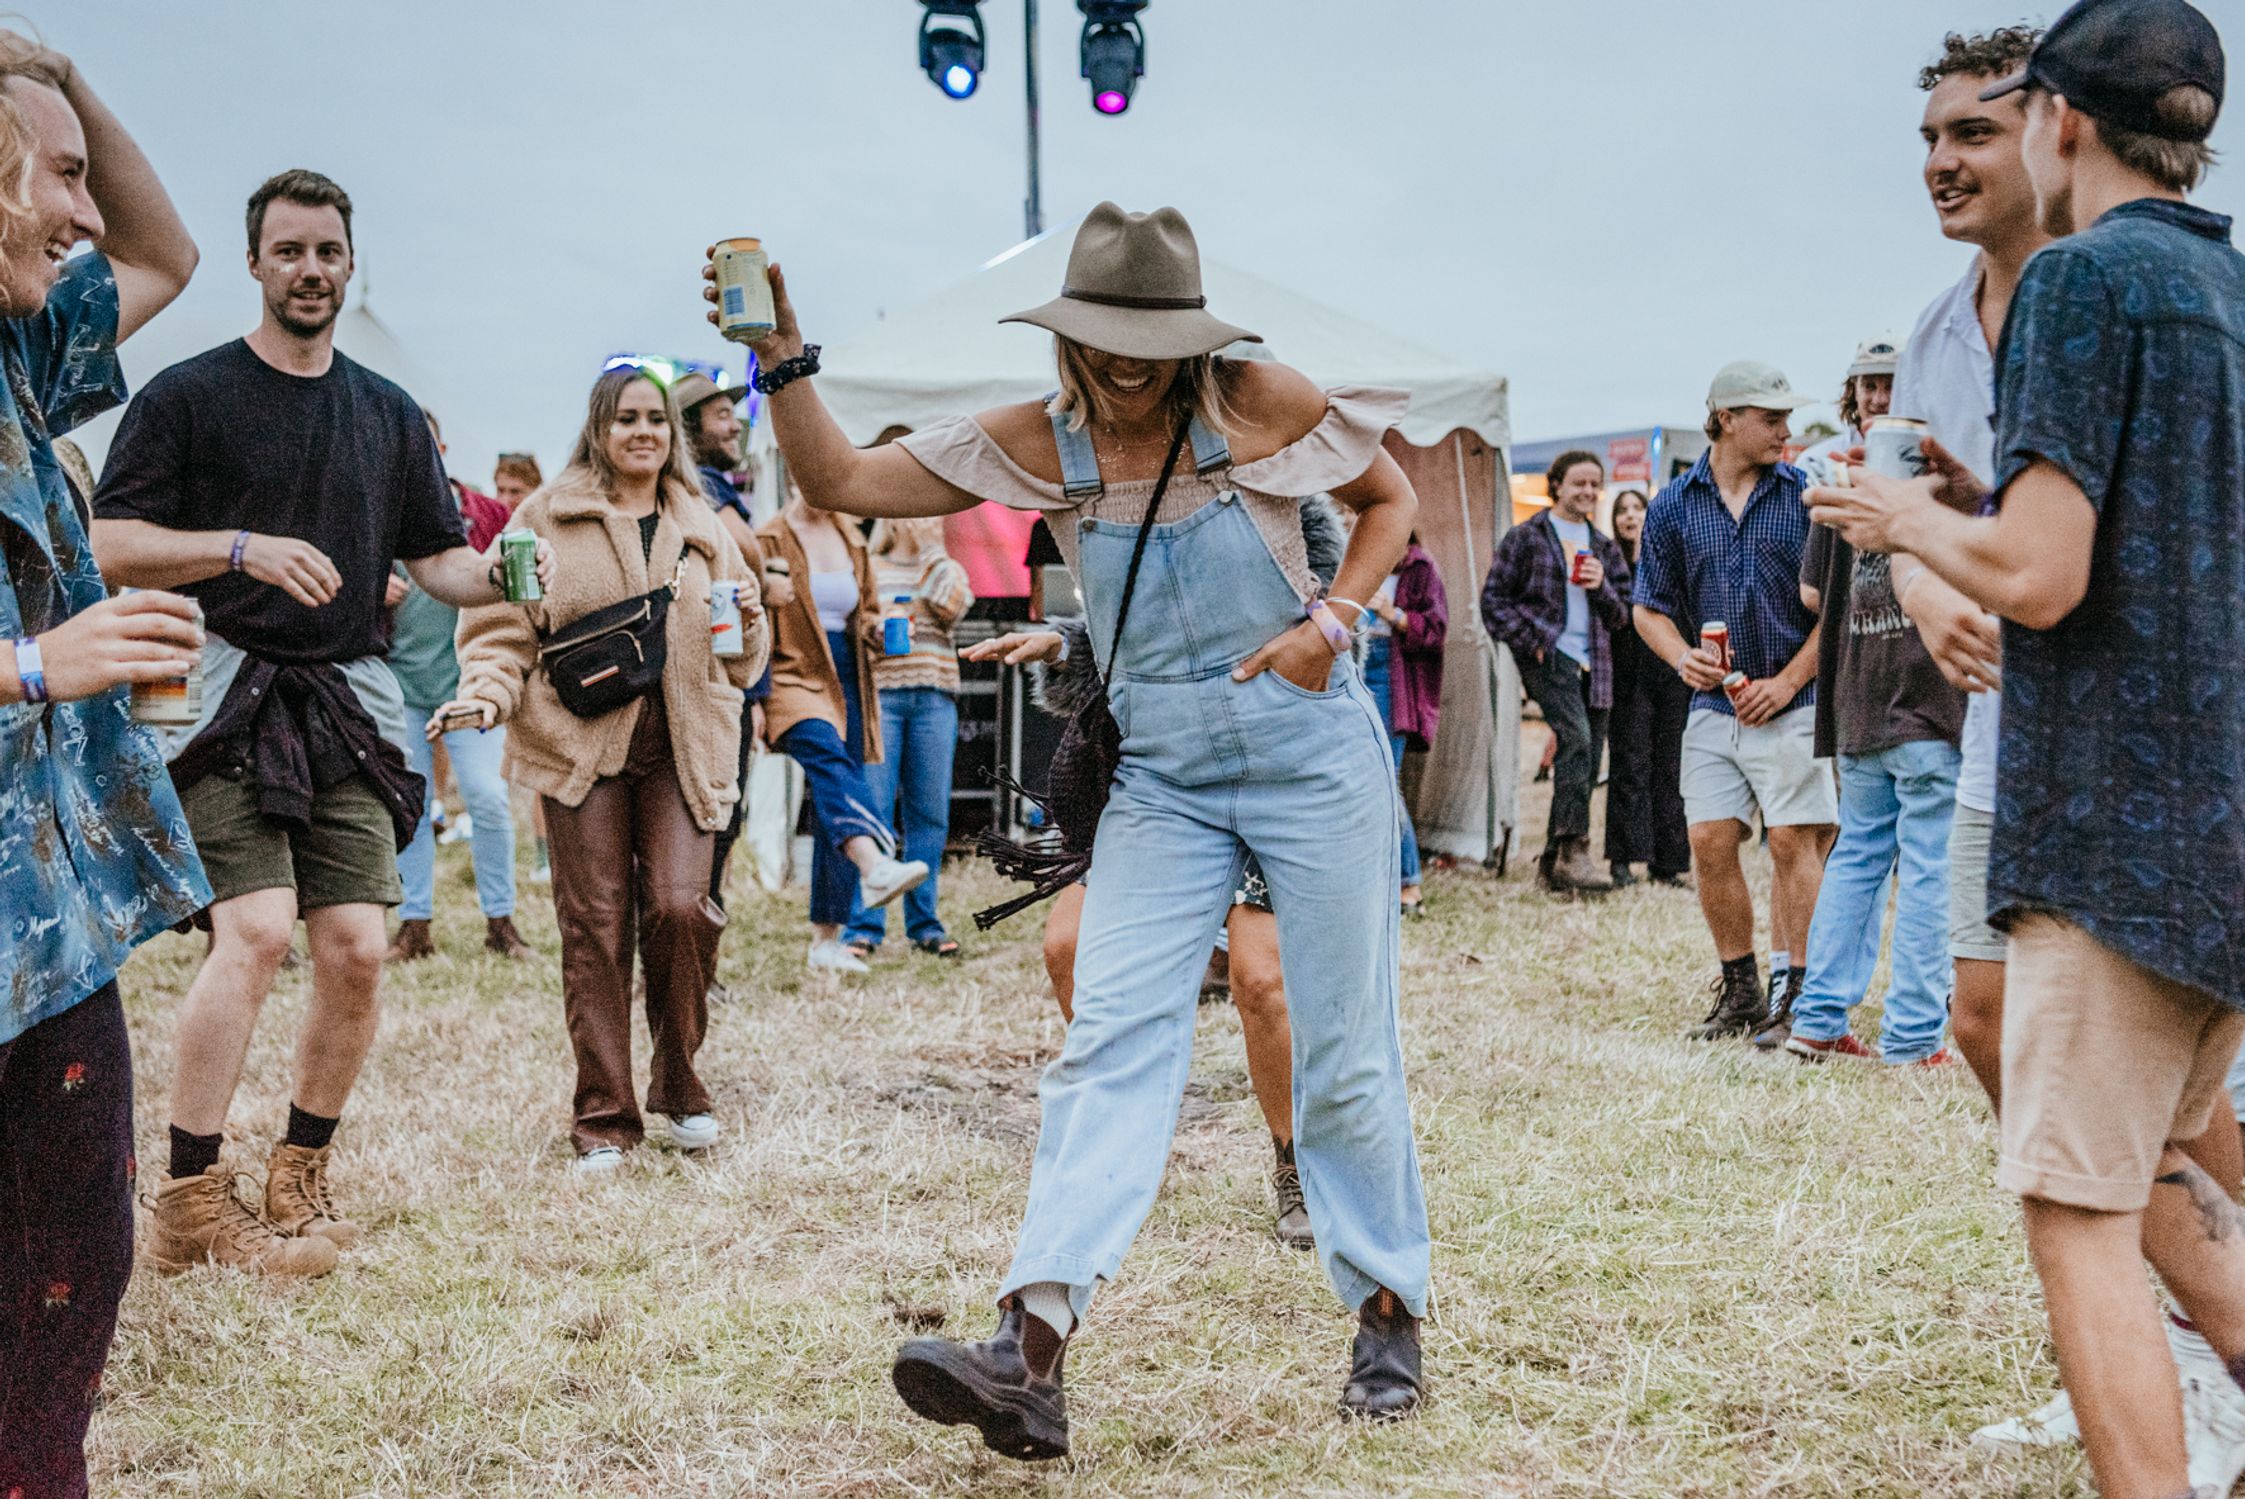 A woman in denim ovrealls dancing with a beer in hand on the festival site